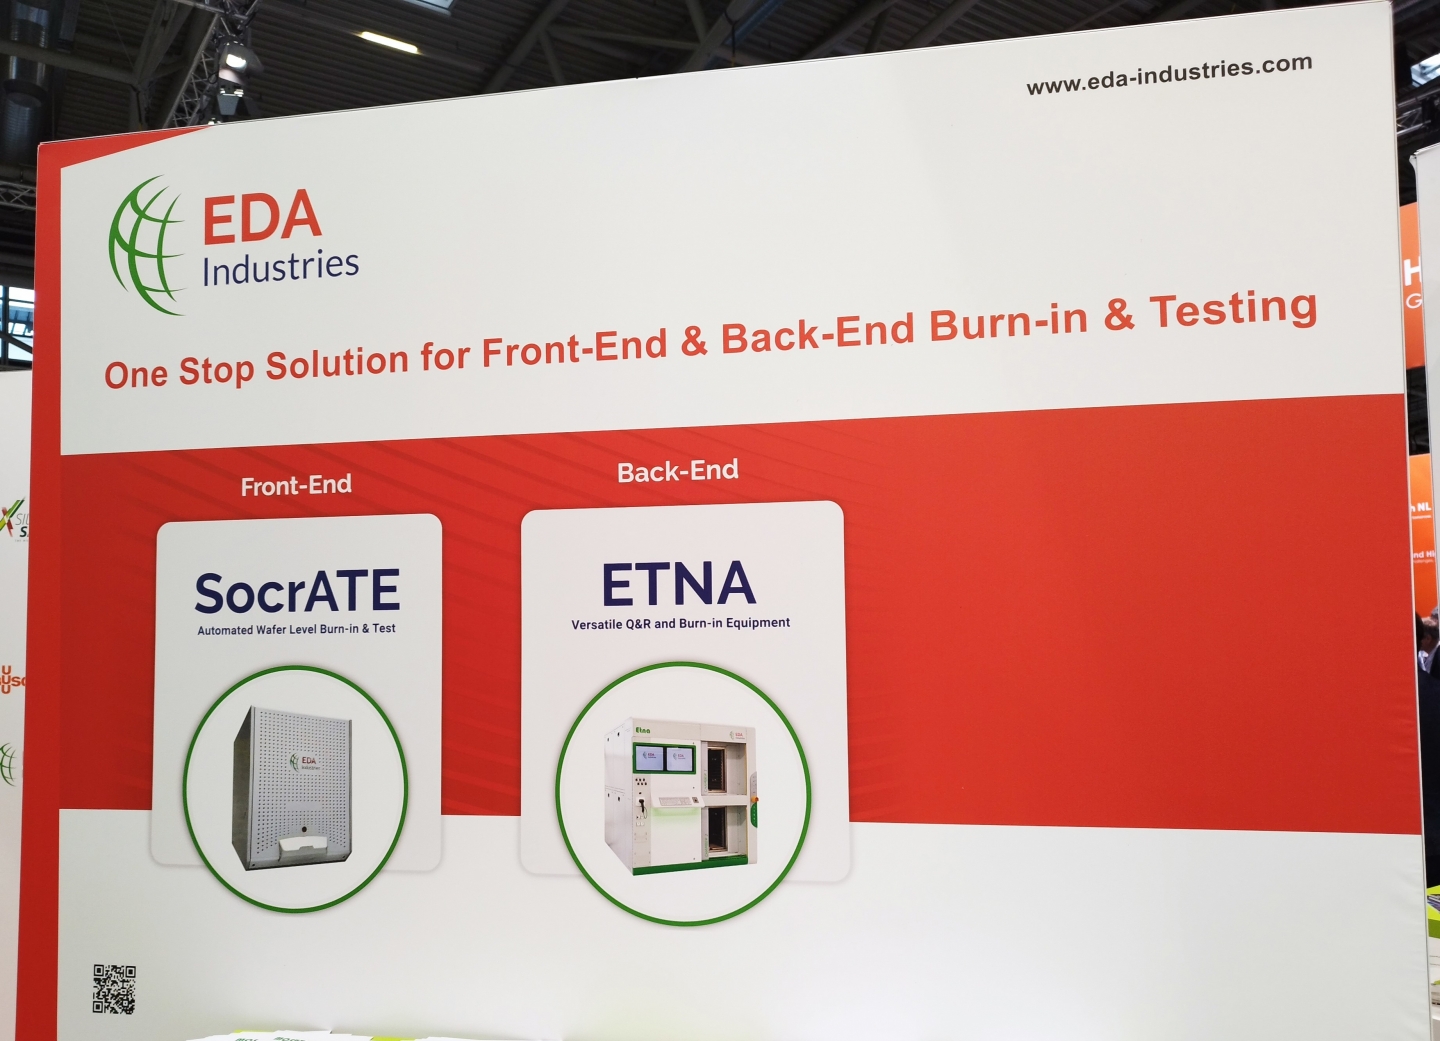 EDA Industries participated at Semicon Europa in Munich